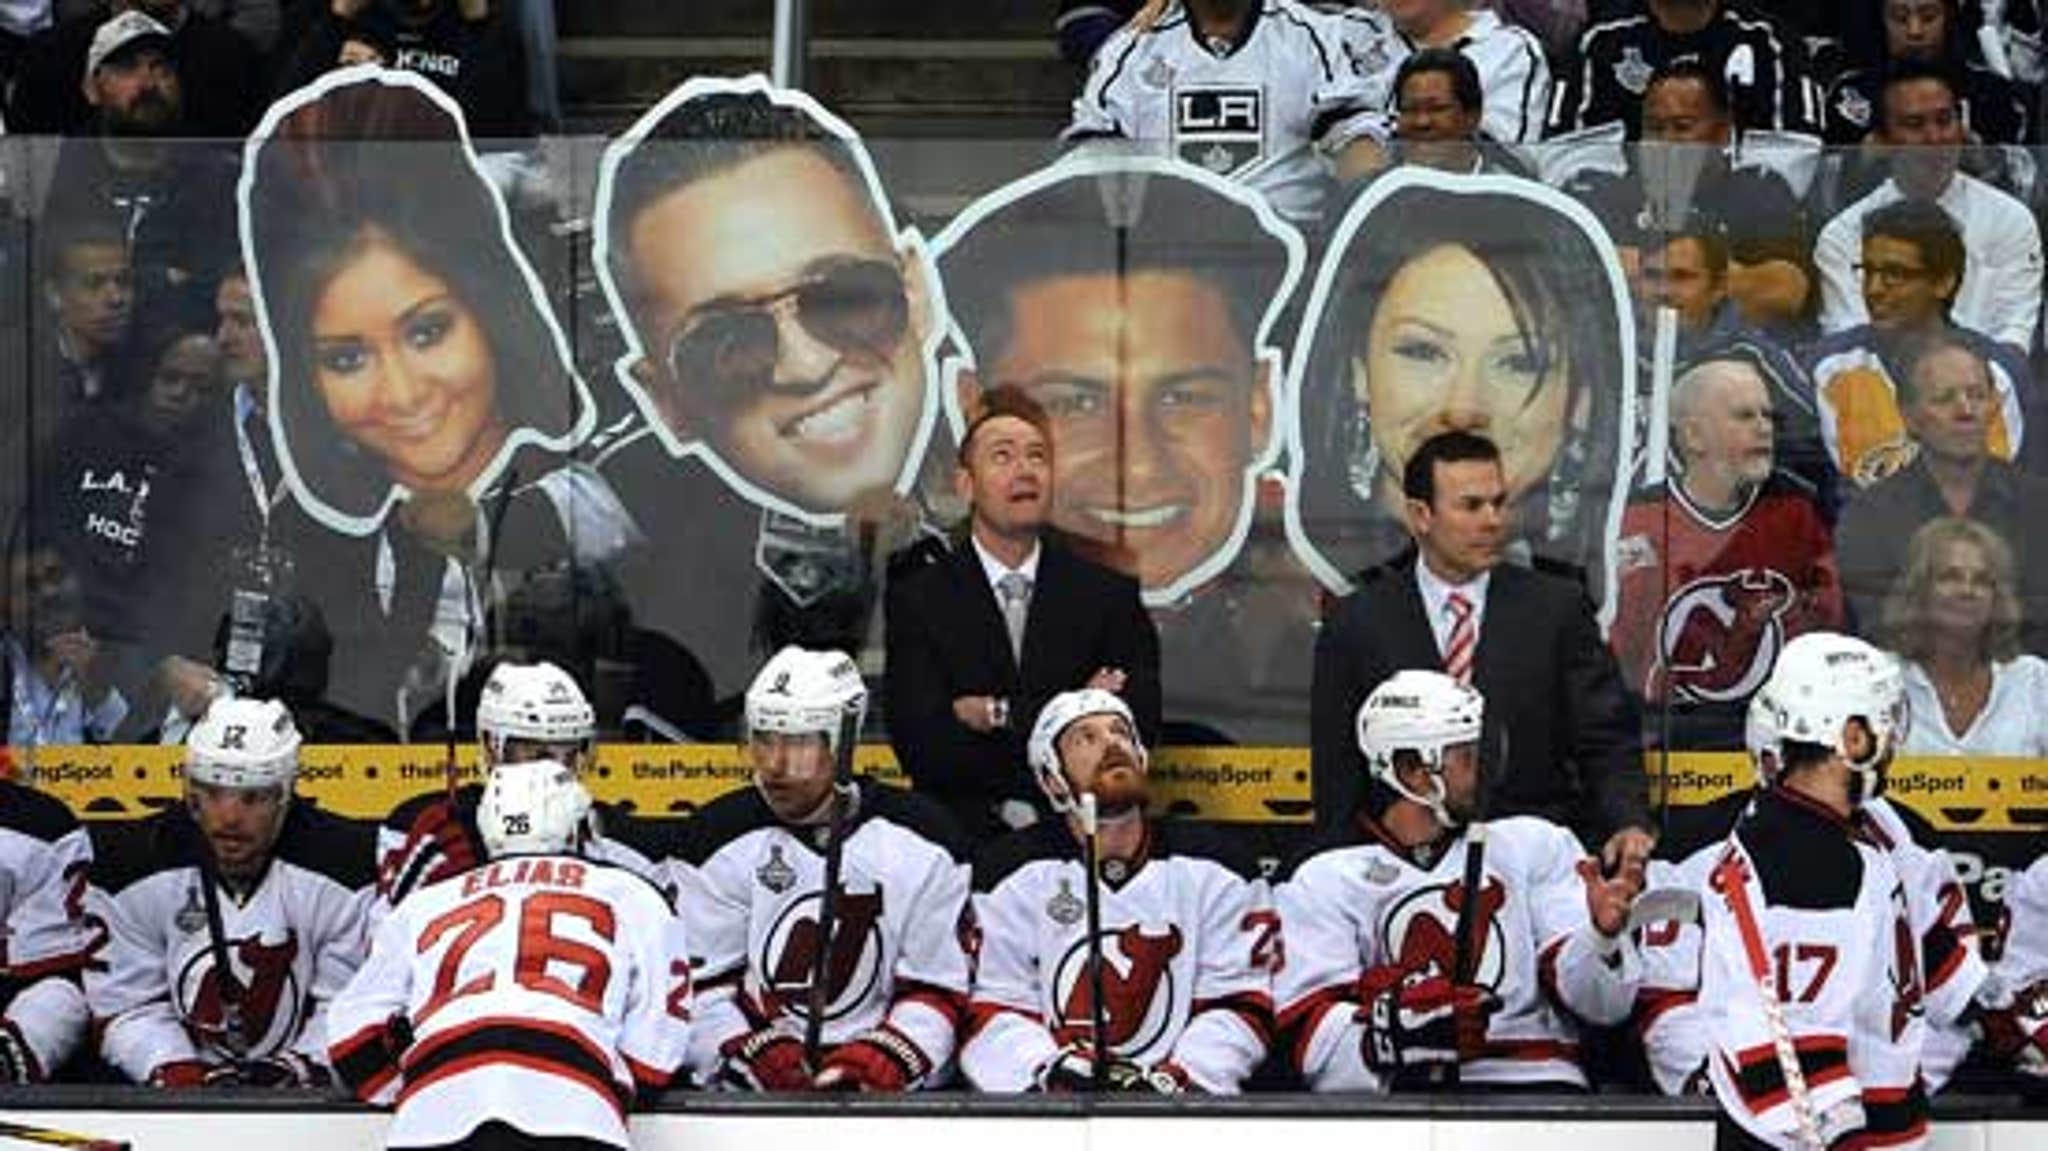 Cast of the Jersey Shore Helps L.A.Kings Fans Taunt the NJ Devils